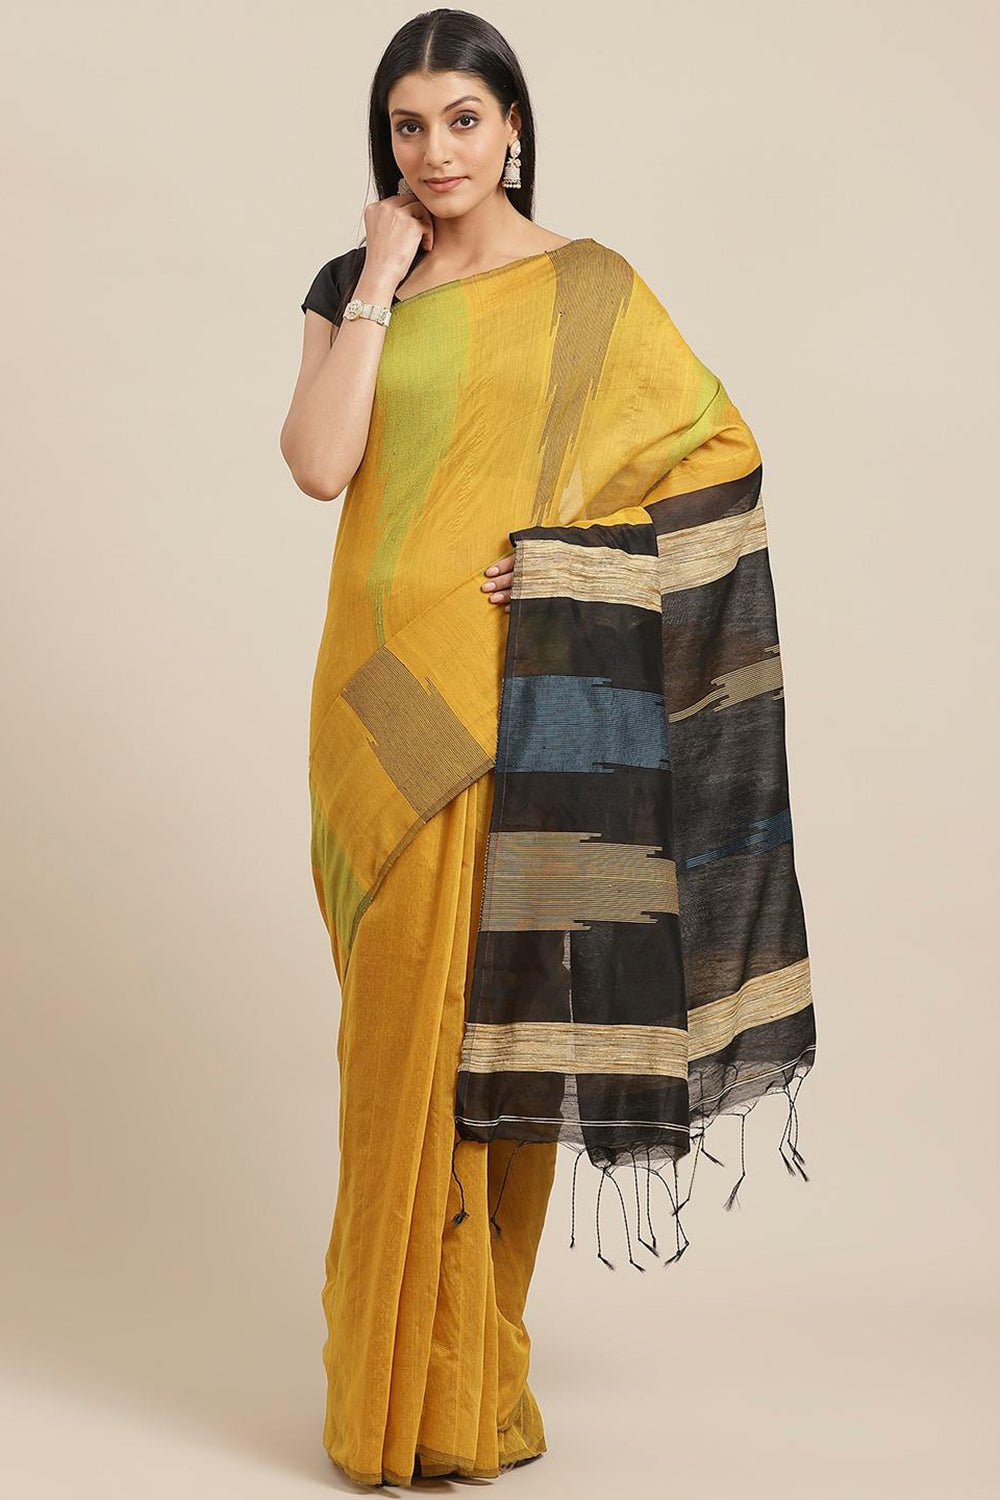 Buy Yellow Woven Cotton Silk One Minute Saree Online